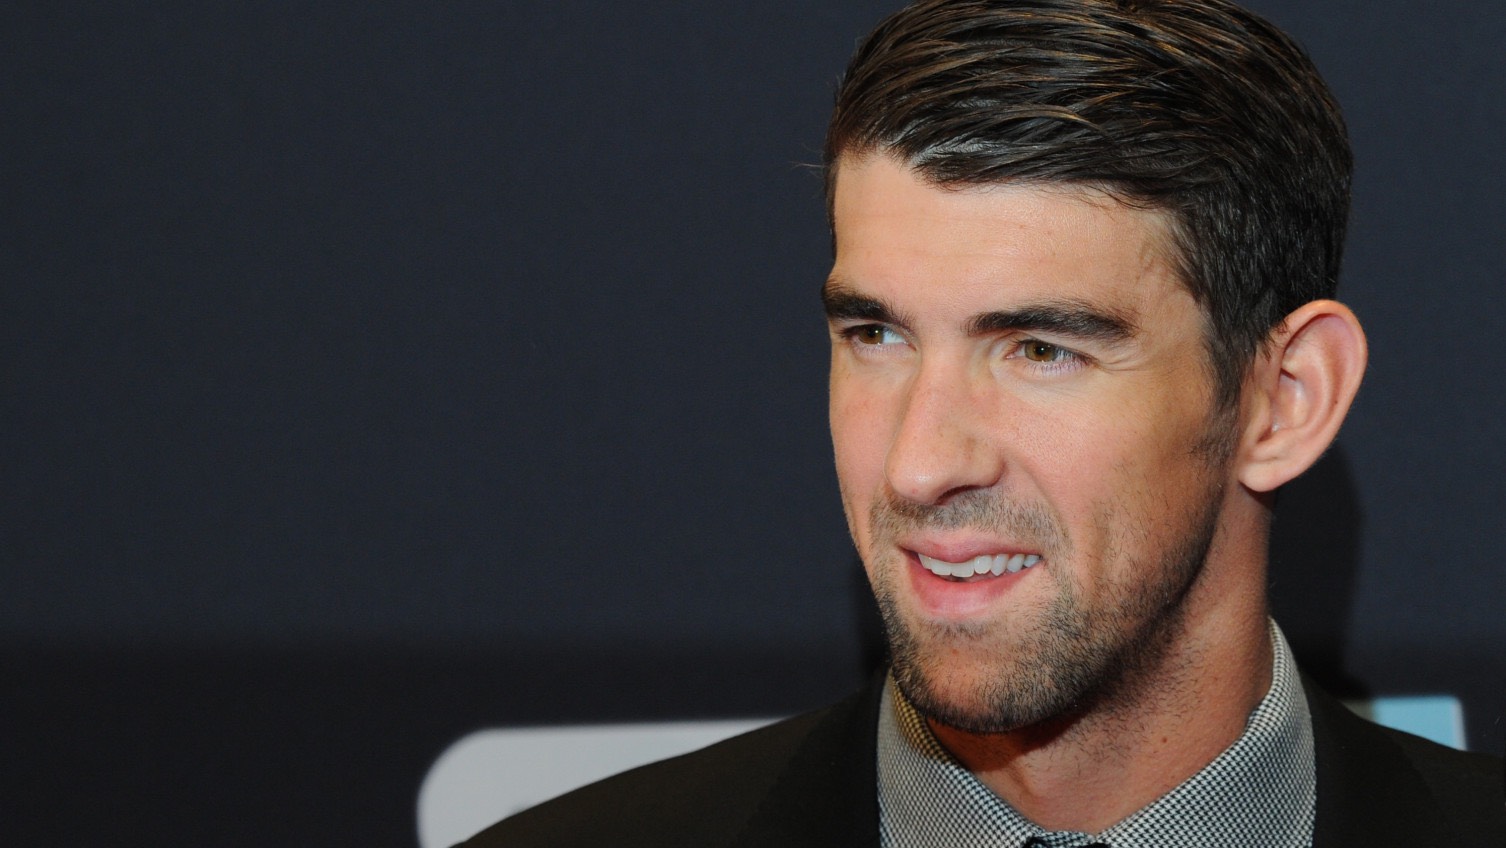 Michael Phelps Supports Tokyo Postponement, but also Worries About Athletes' Depression (NBC Sports)